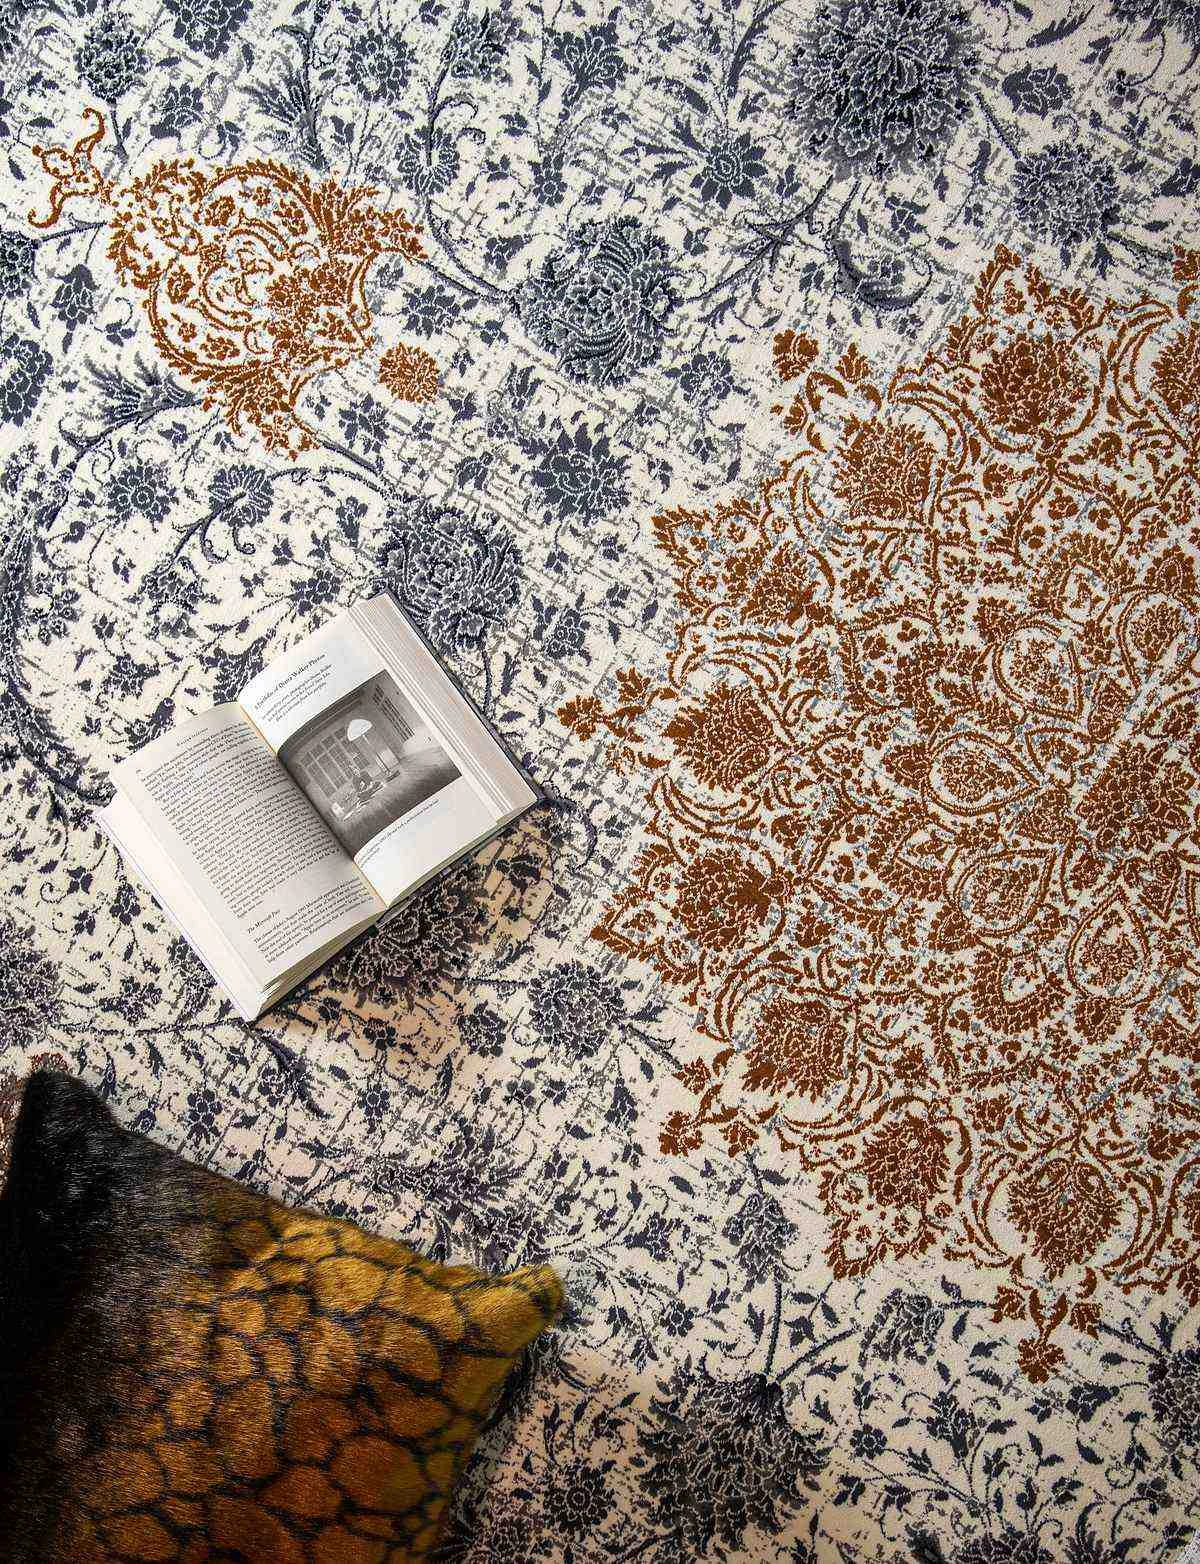 Tips when buying Persian rugs